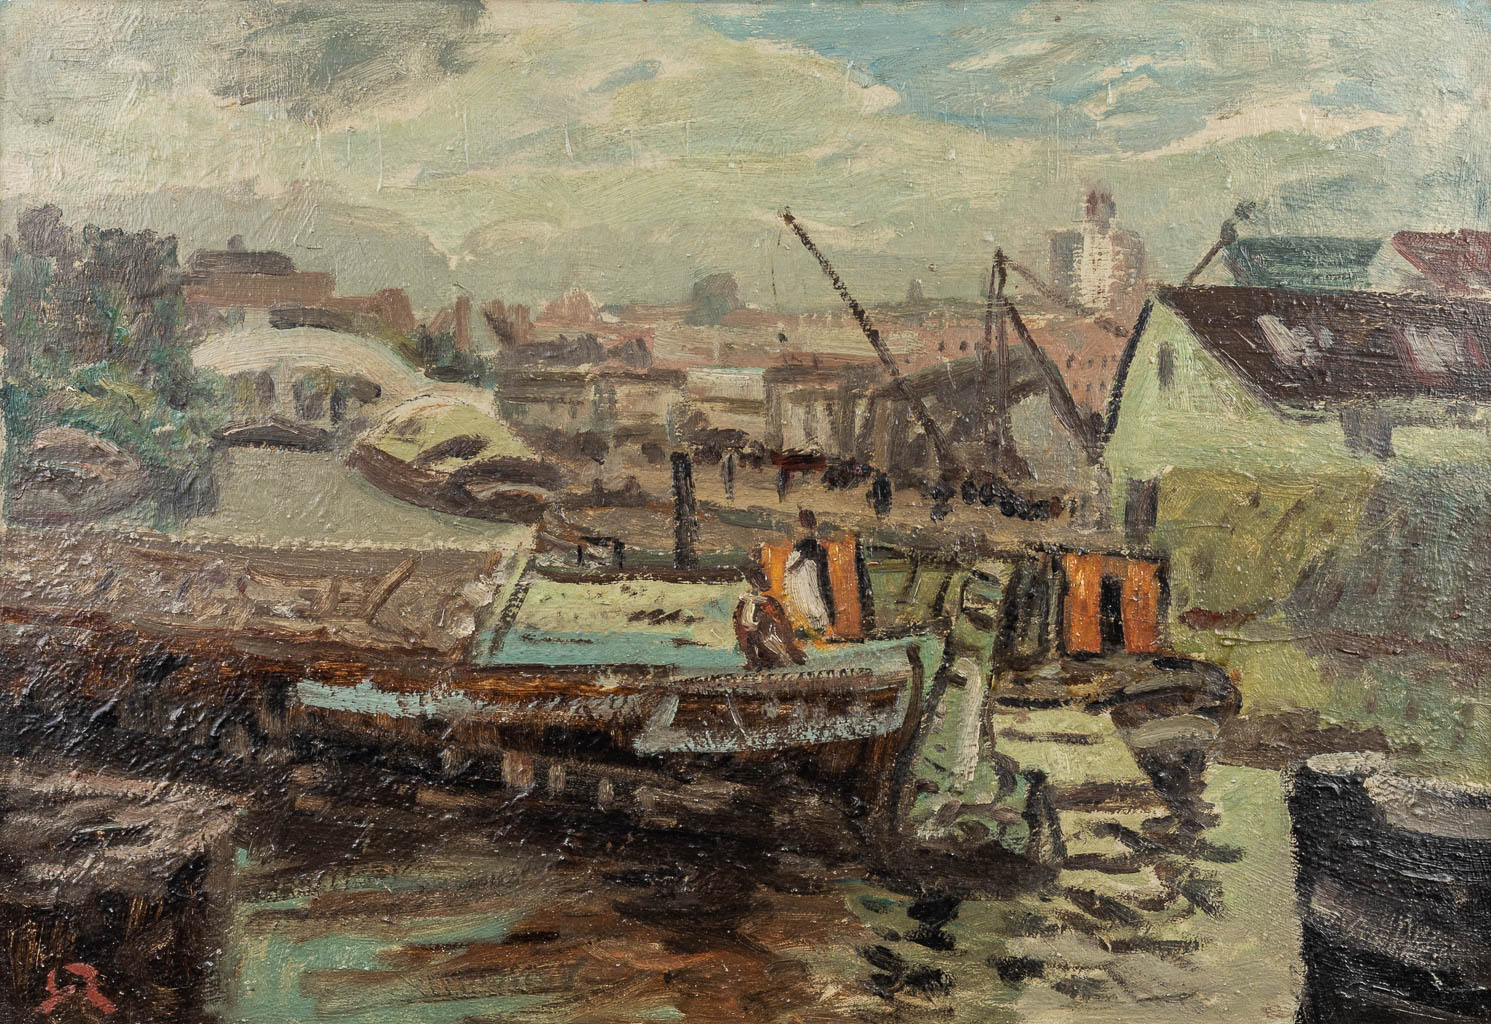 Auguste OLEFFE (1867-1931) 'Harbor View' a painting, oil on canvas. (48 x 70 cm)